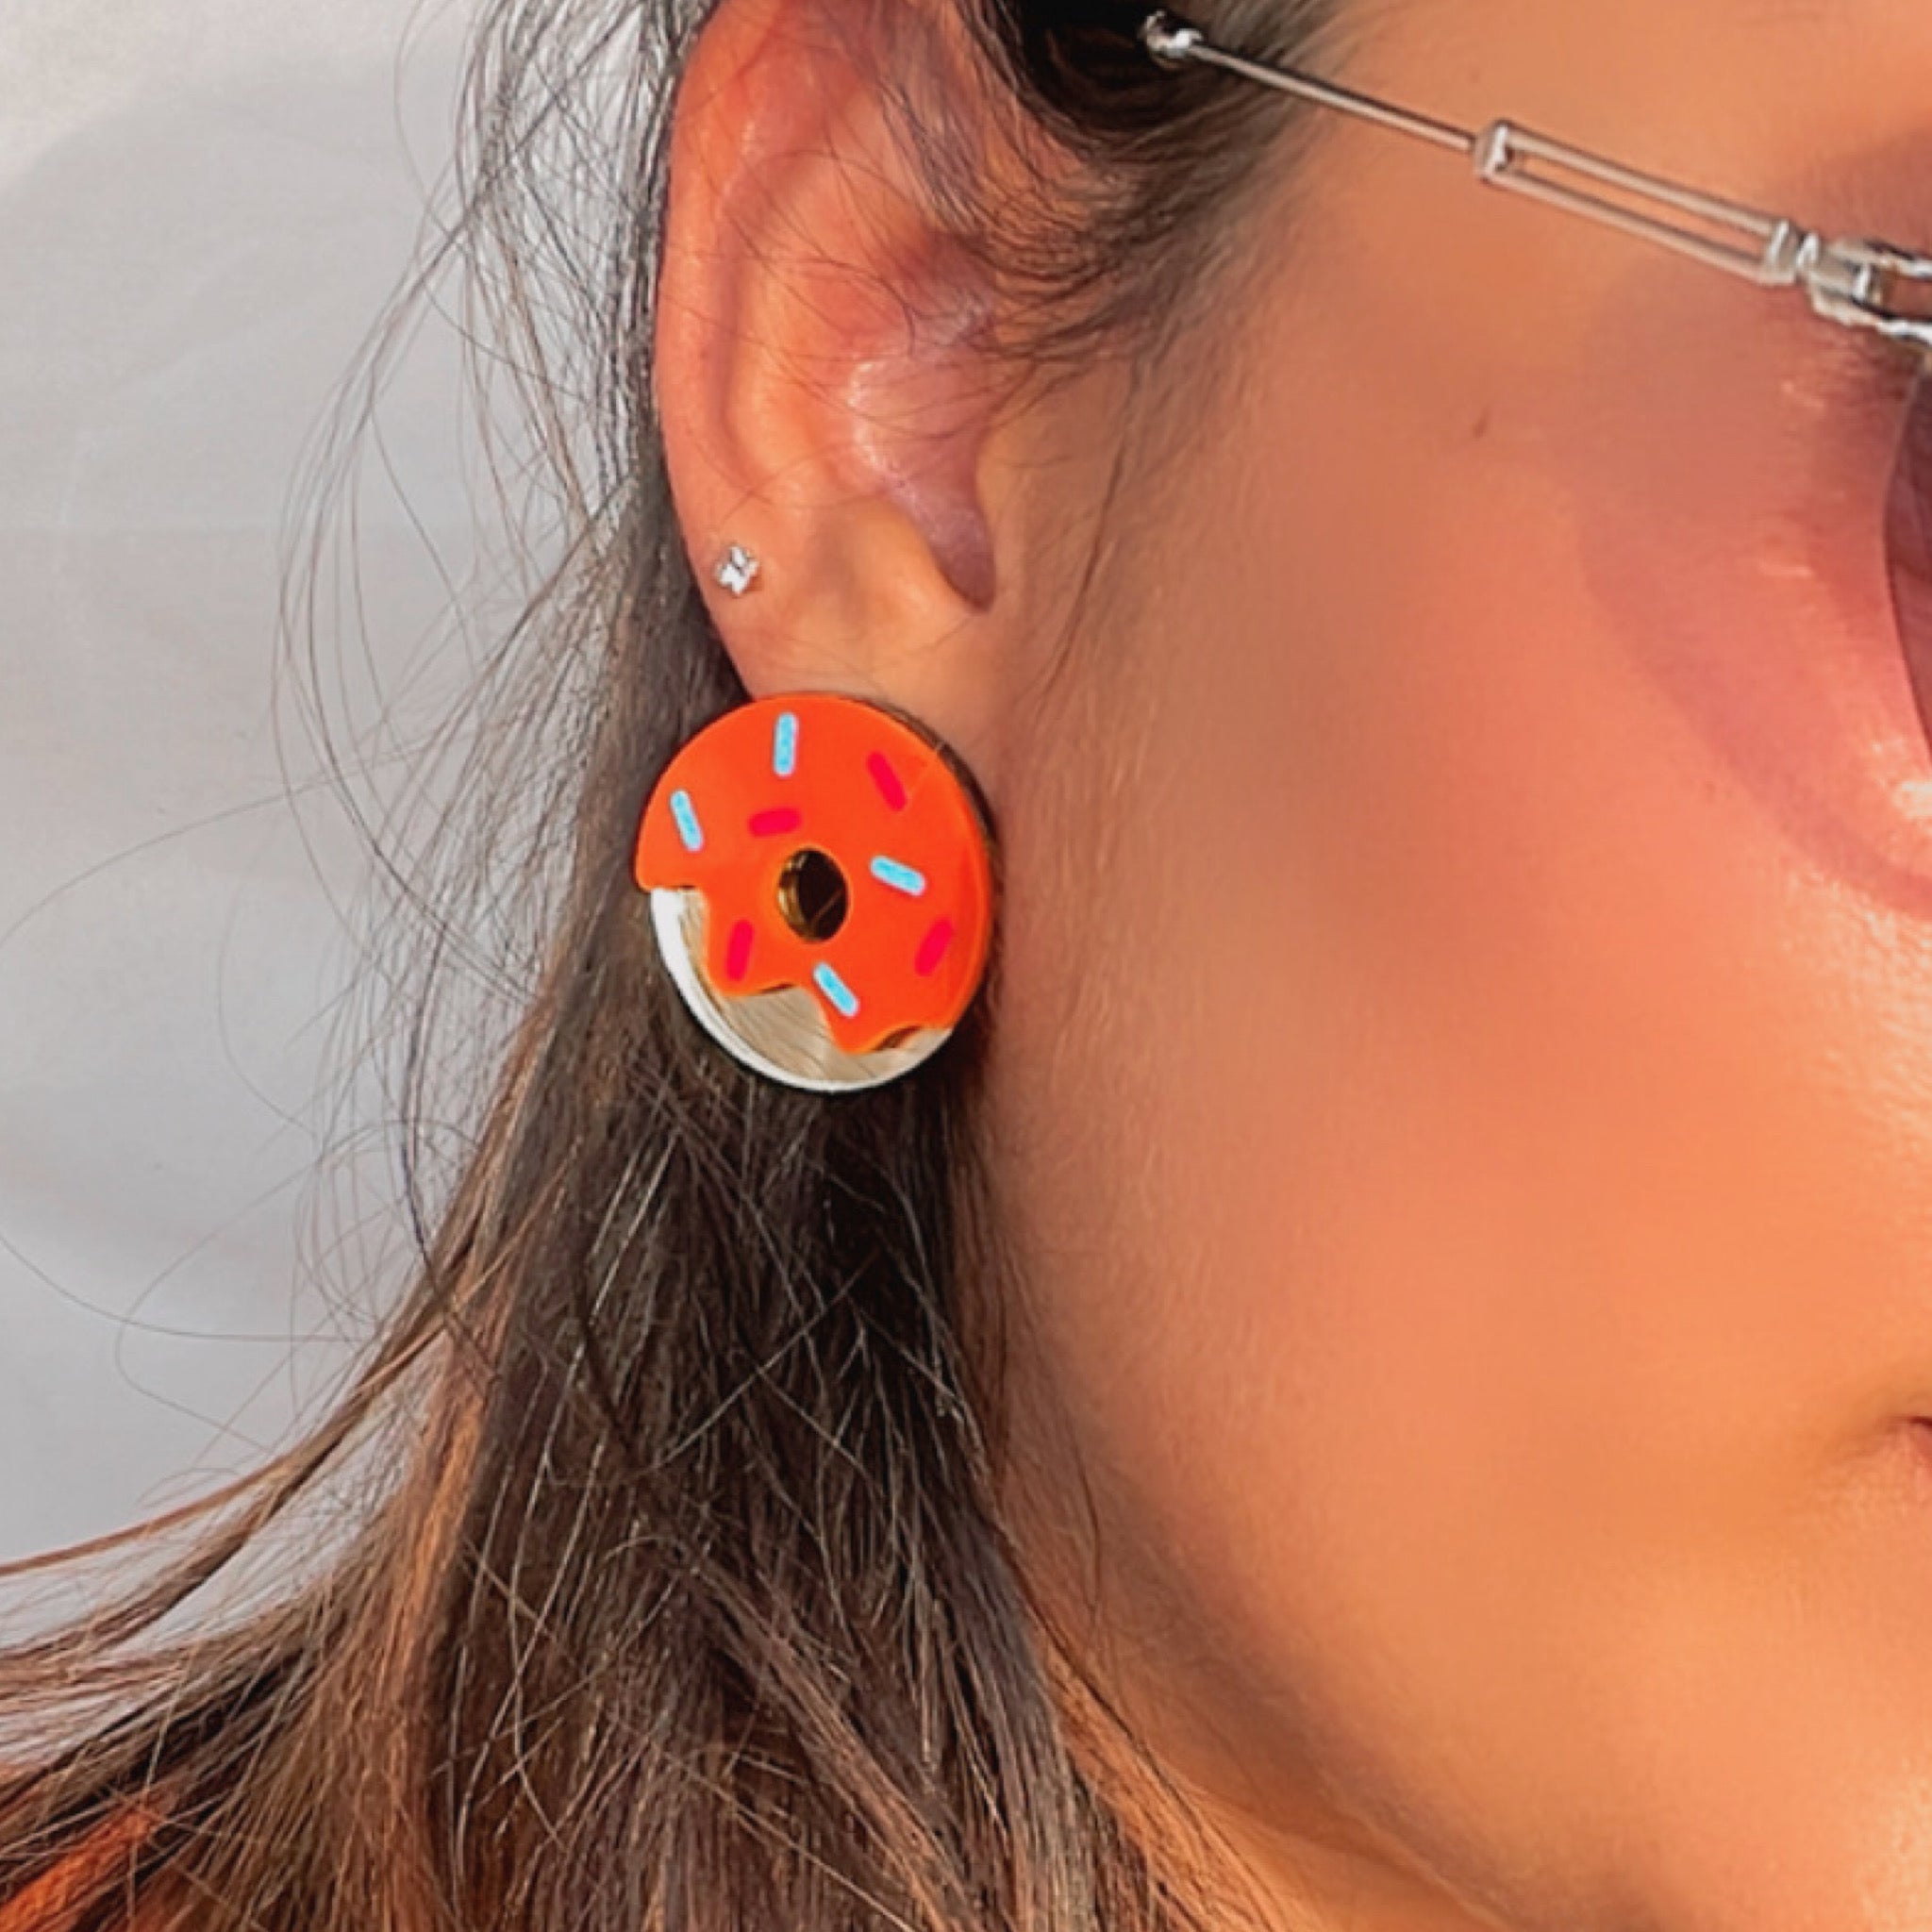 Donut Delight Earrings - Orange and Golden - Nian by Nidhi - worn by a woman